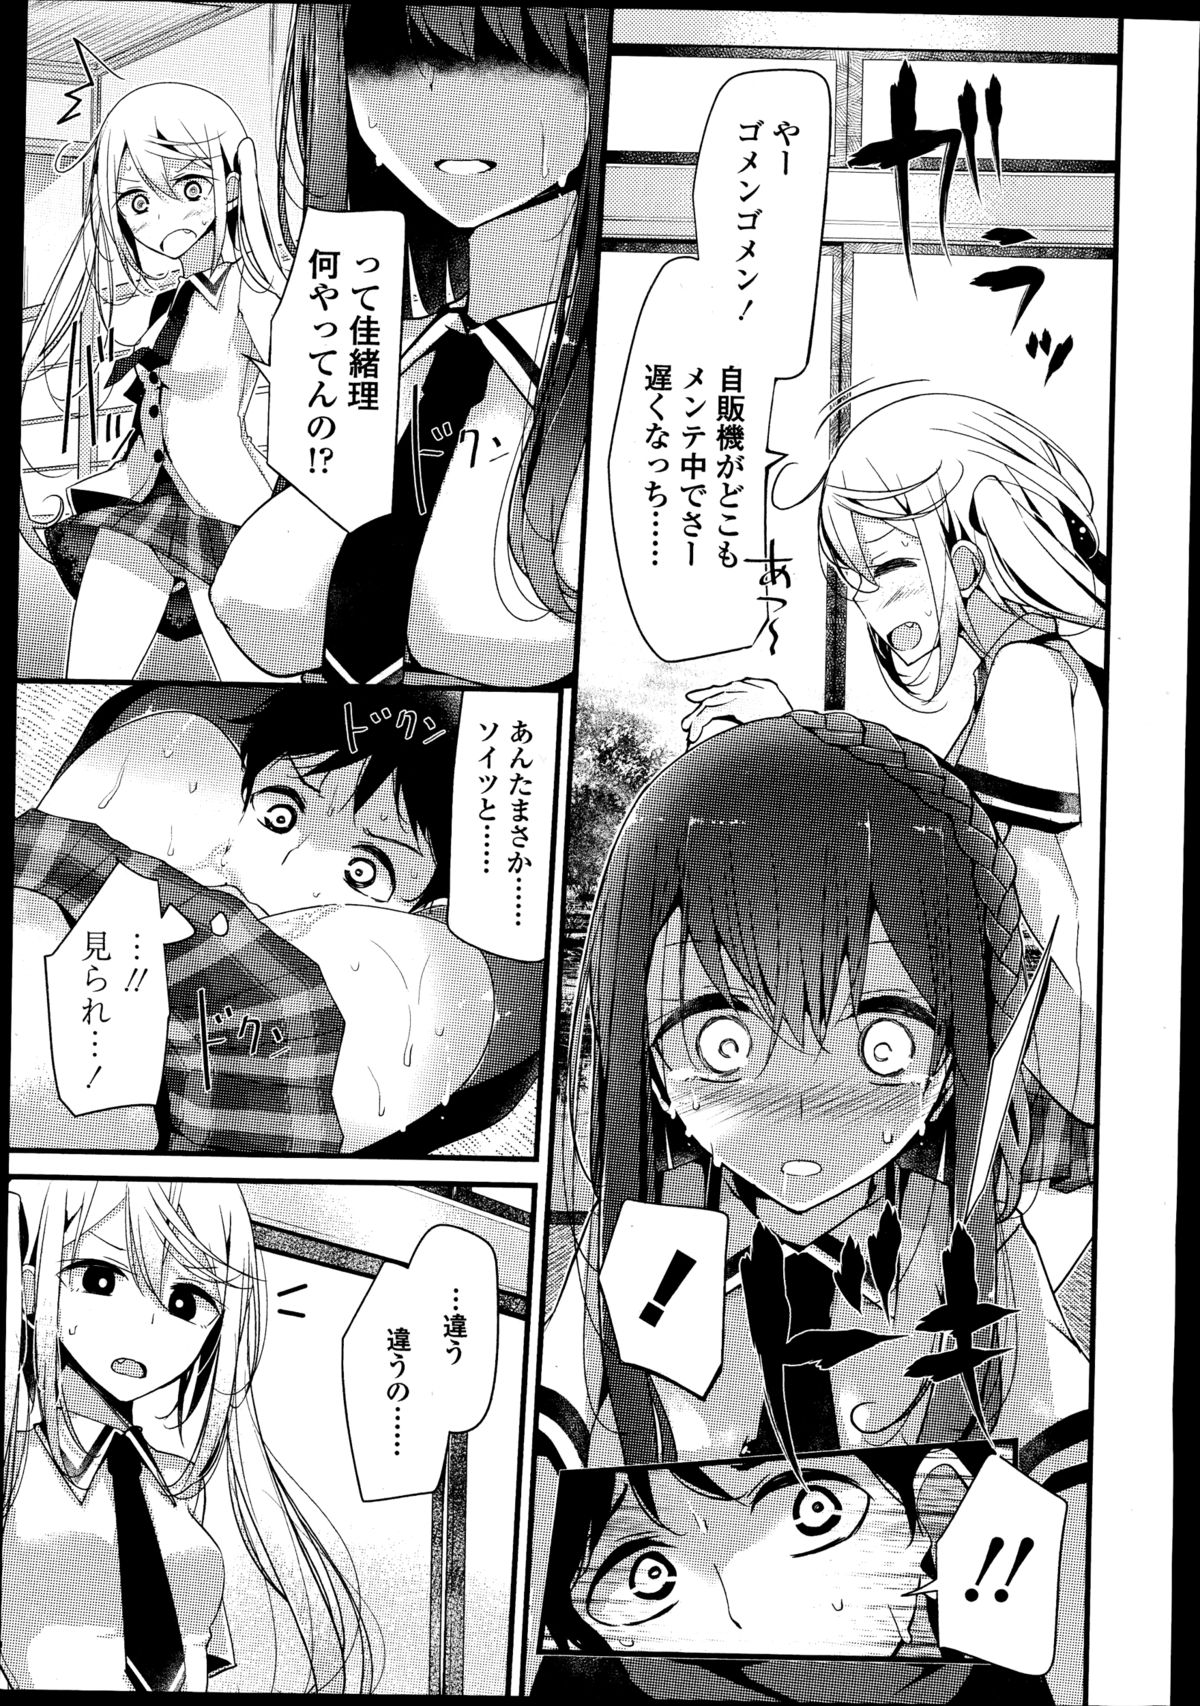 Girls forM Vol. 08 page 33 full